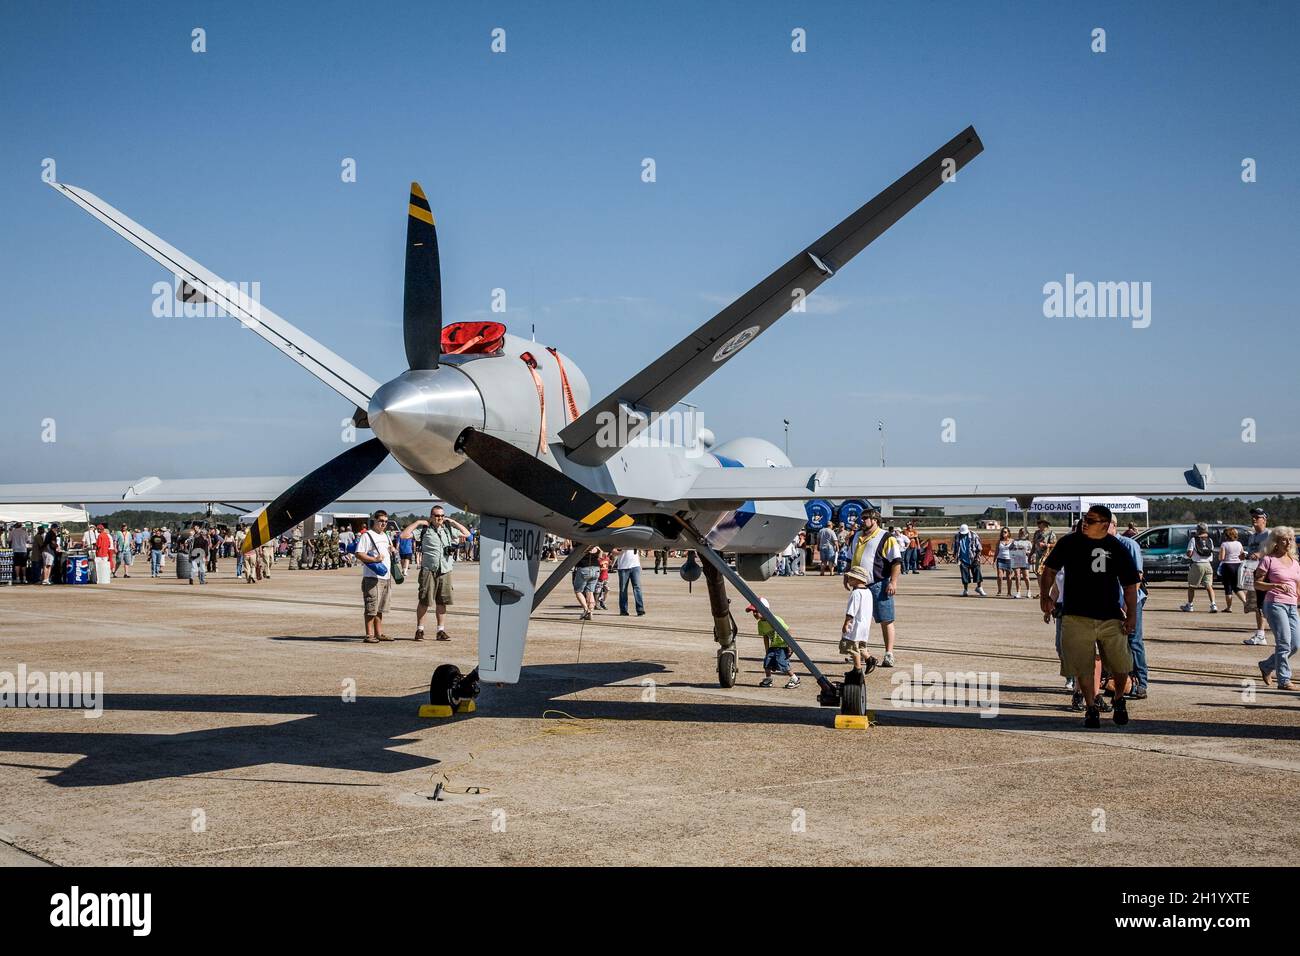 Predator drone at an airshow in Florida. Stock Photo